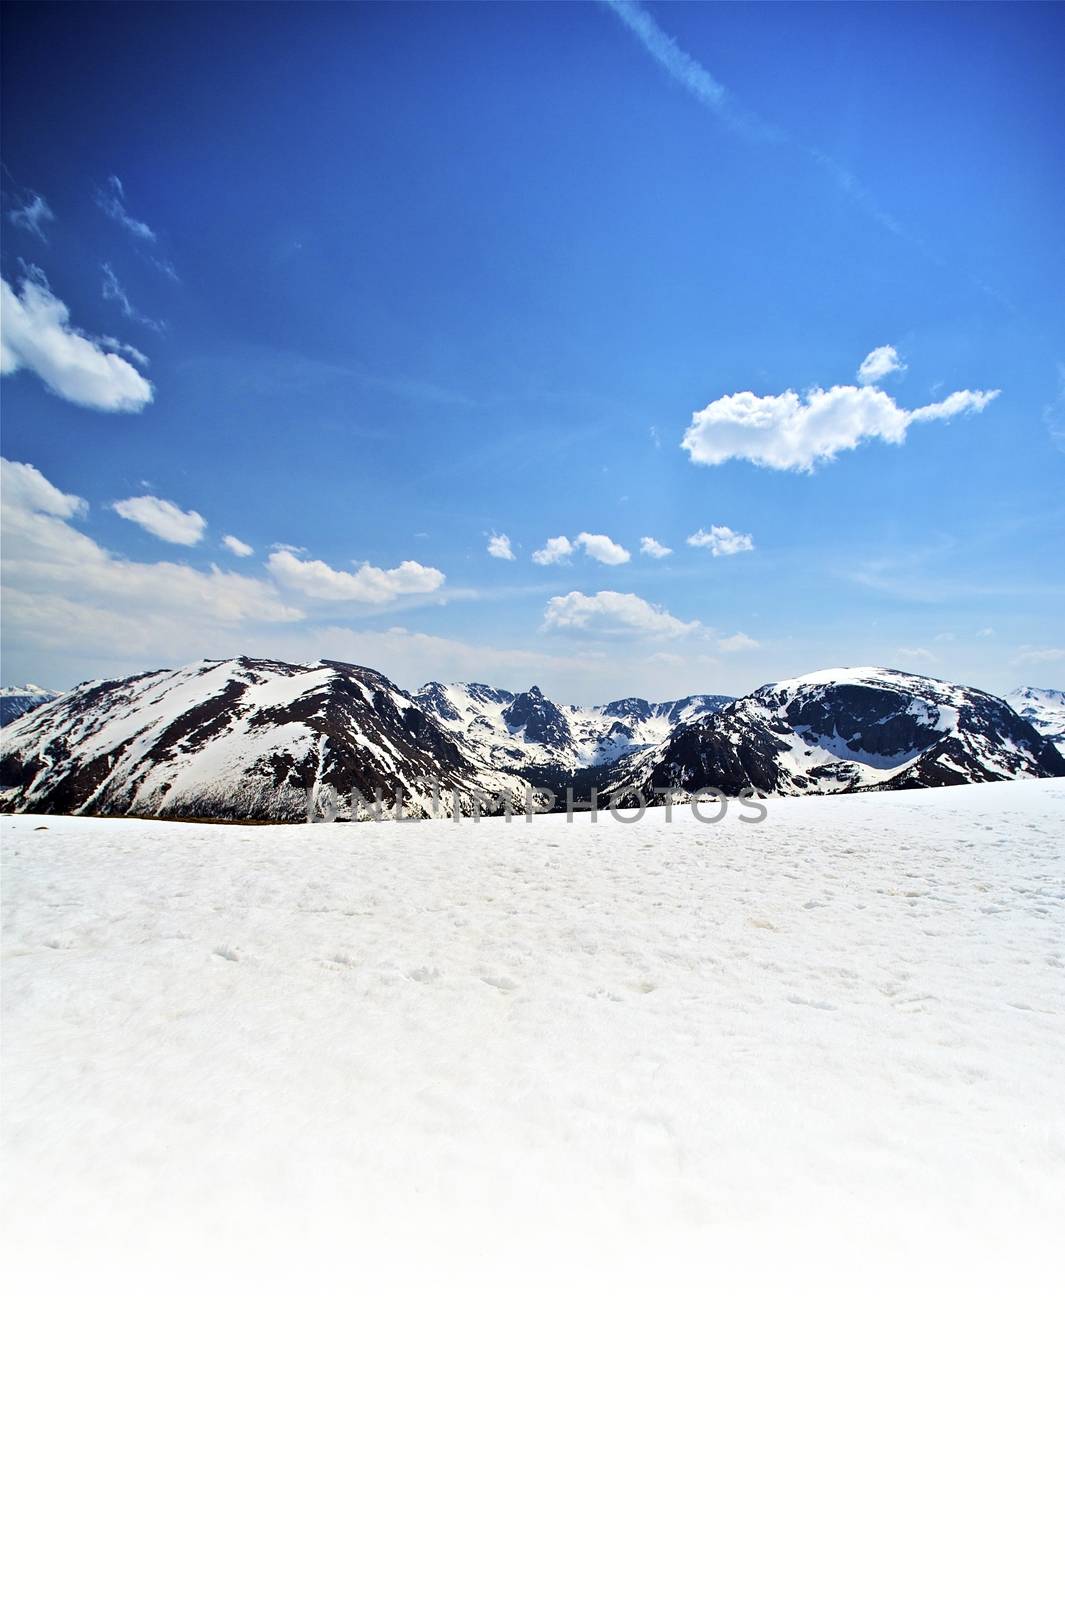 Snowy Mountains. Colorado Rocky Mountains Landspace. Vertical Photo with White Bottom Copy Space. Nature Photo Collection.